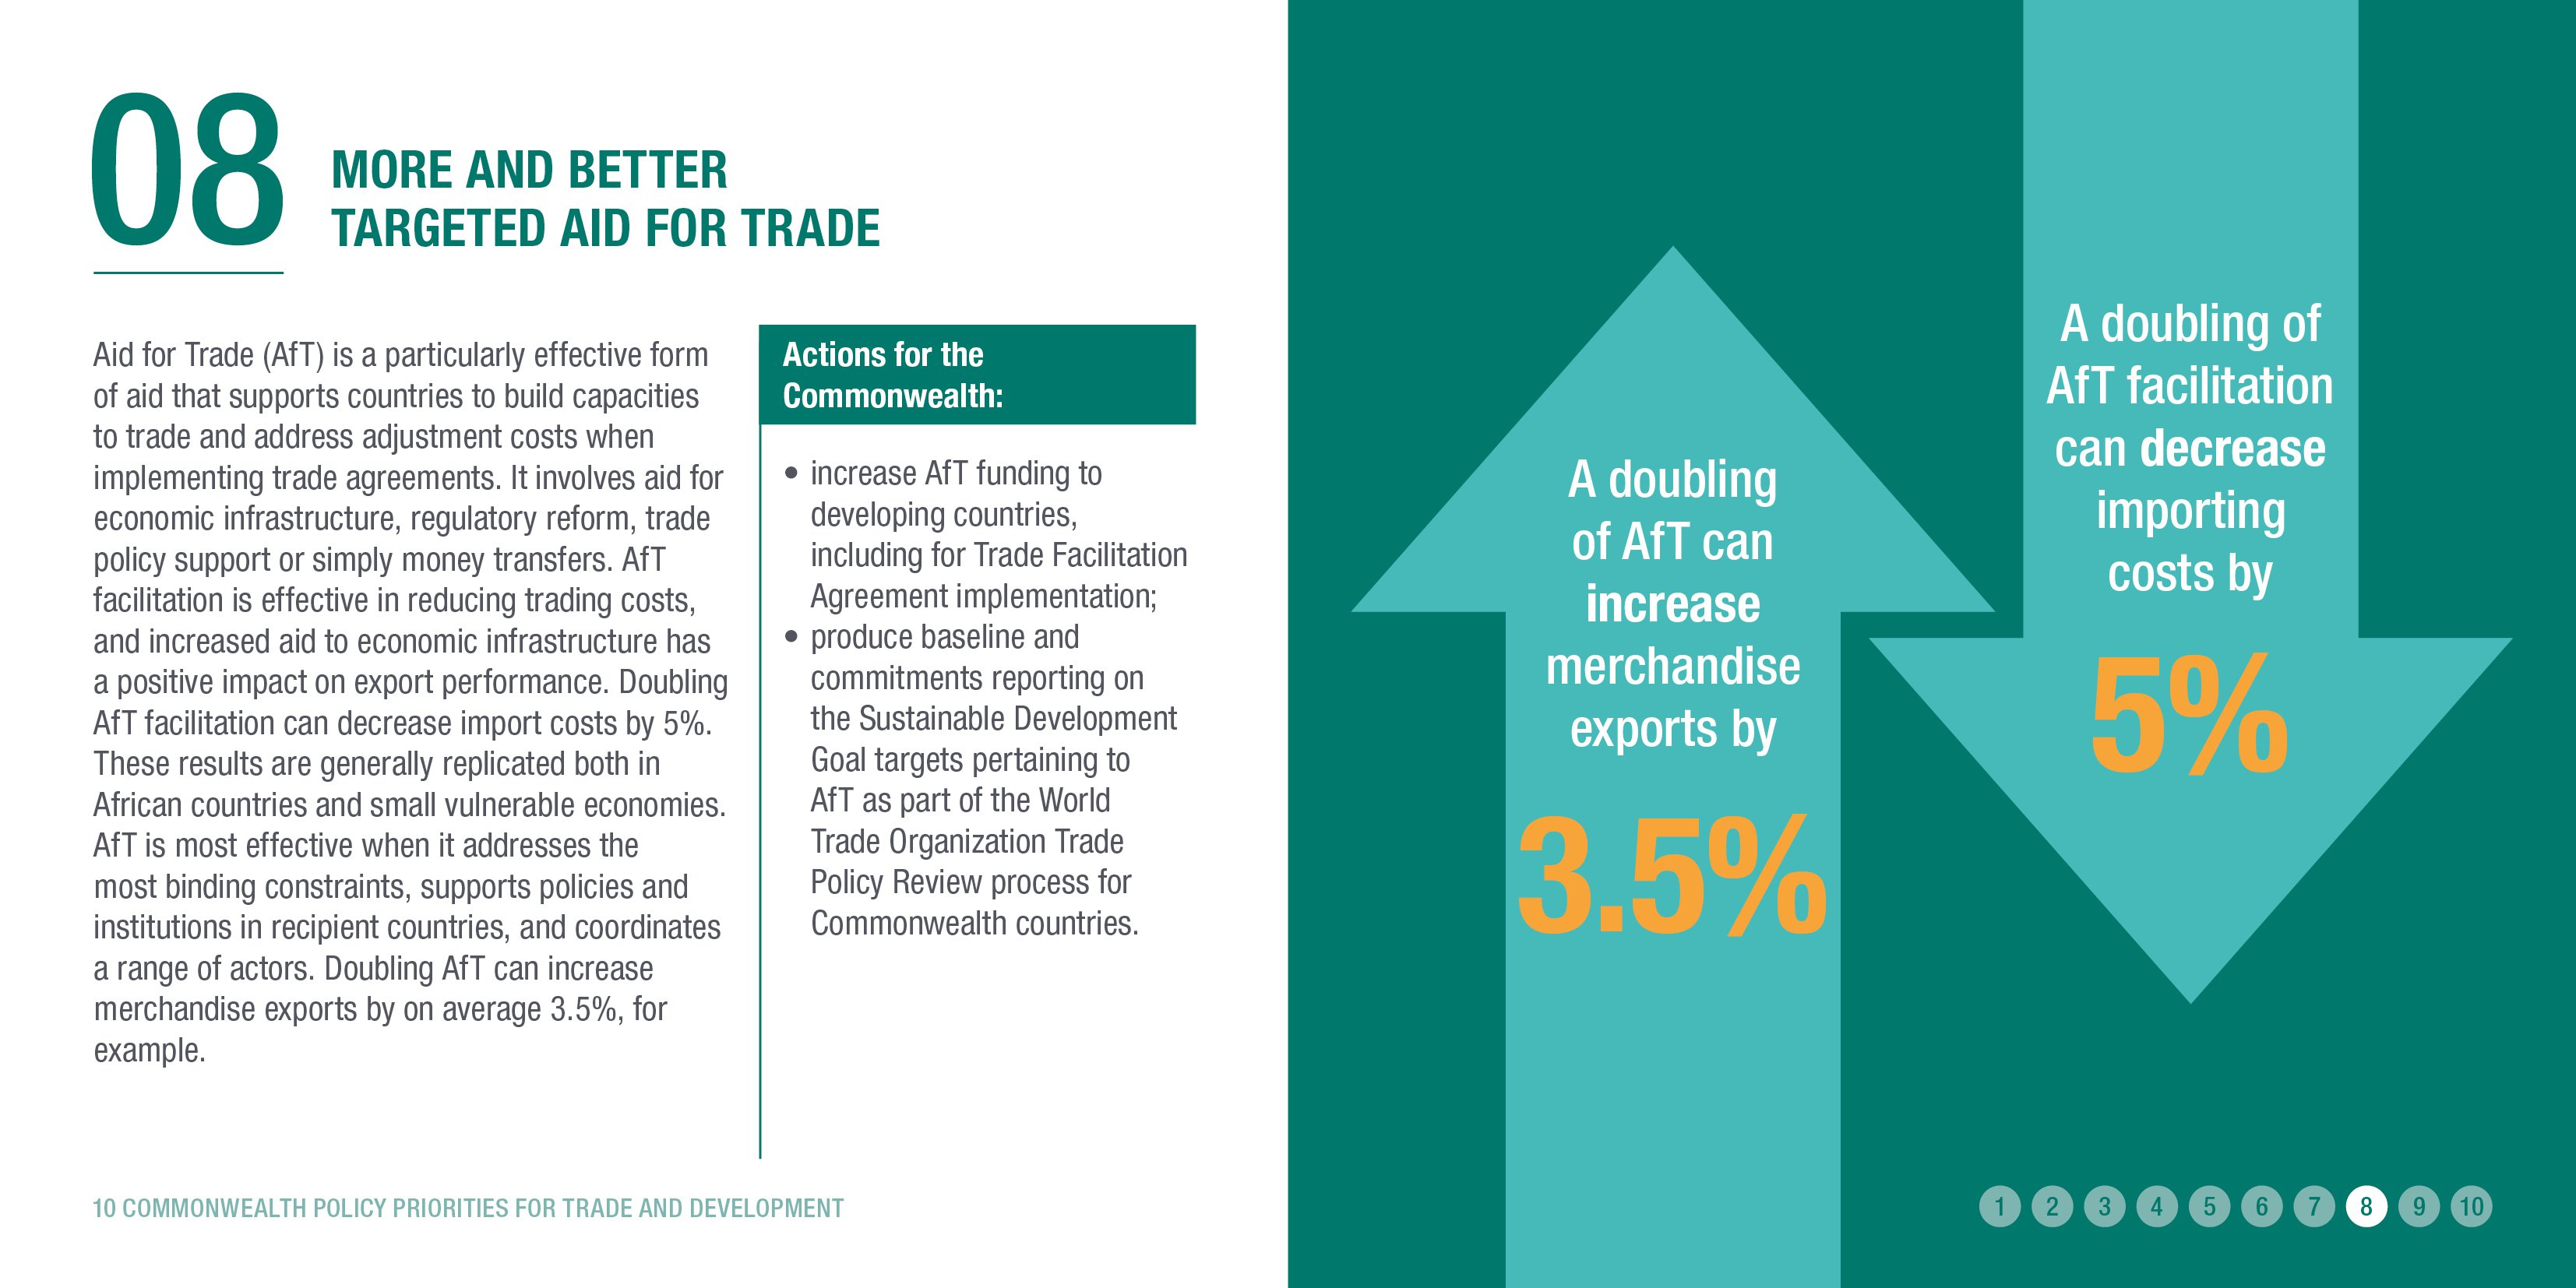 More and better targeted Aid for Trade